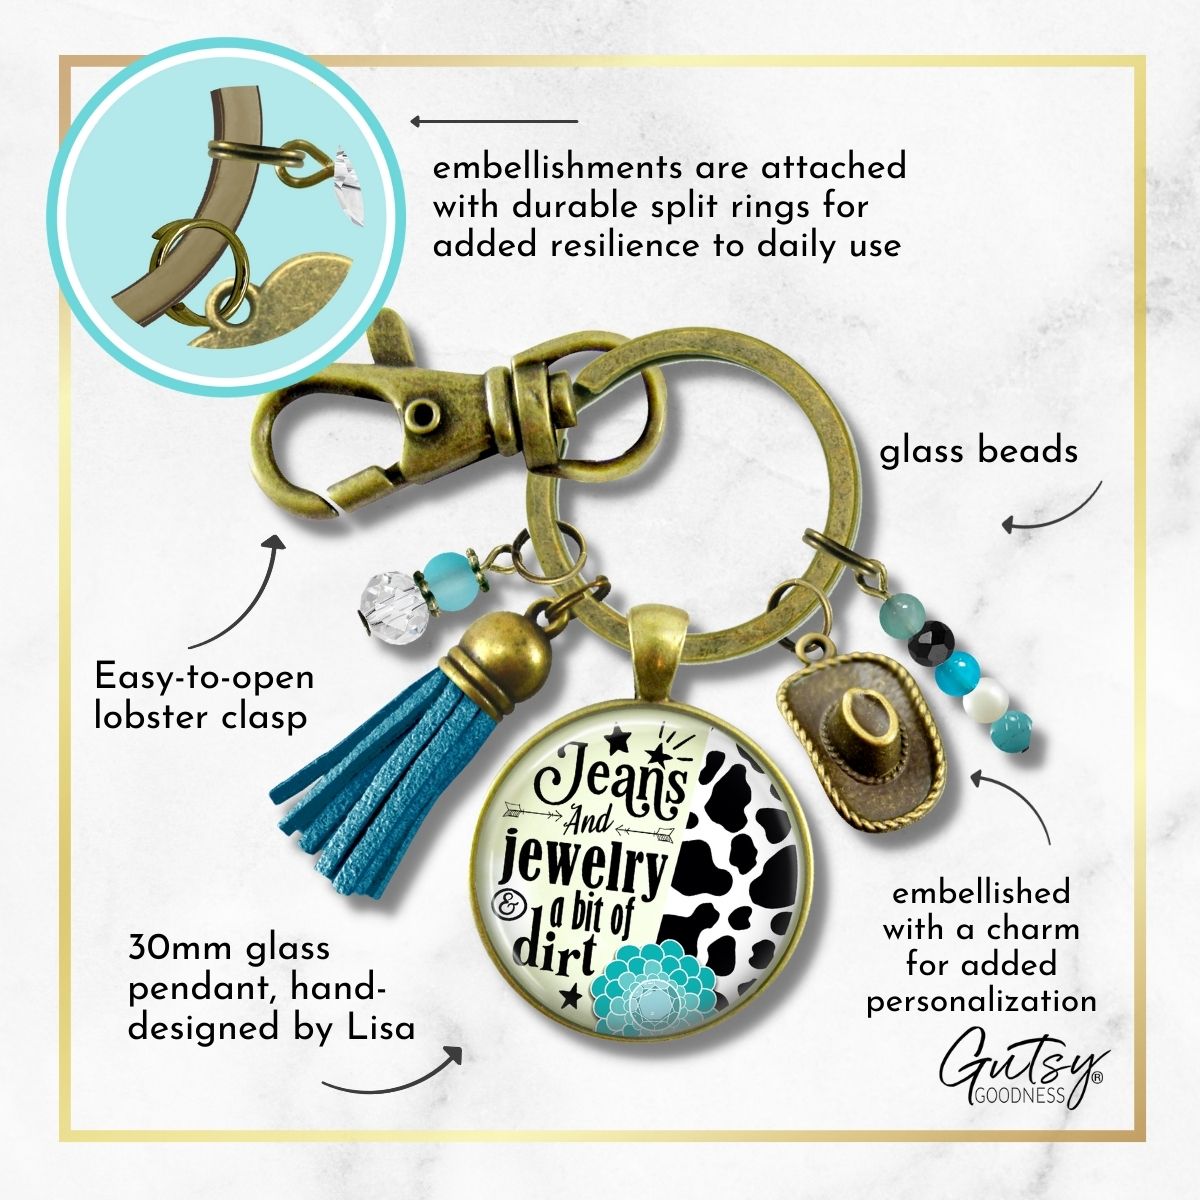 Handmade Gutsy Goodness Jewelry Jeans And Jewelry And A Bit Of Dirt Keychain Western Cowboy Hat & Tassel, Country Girl Message Card